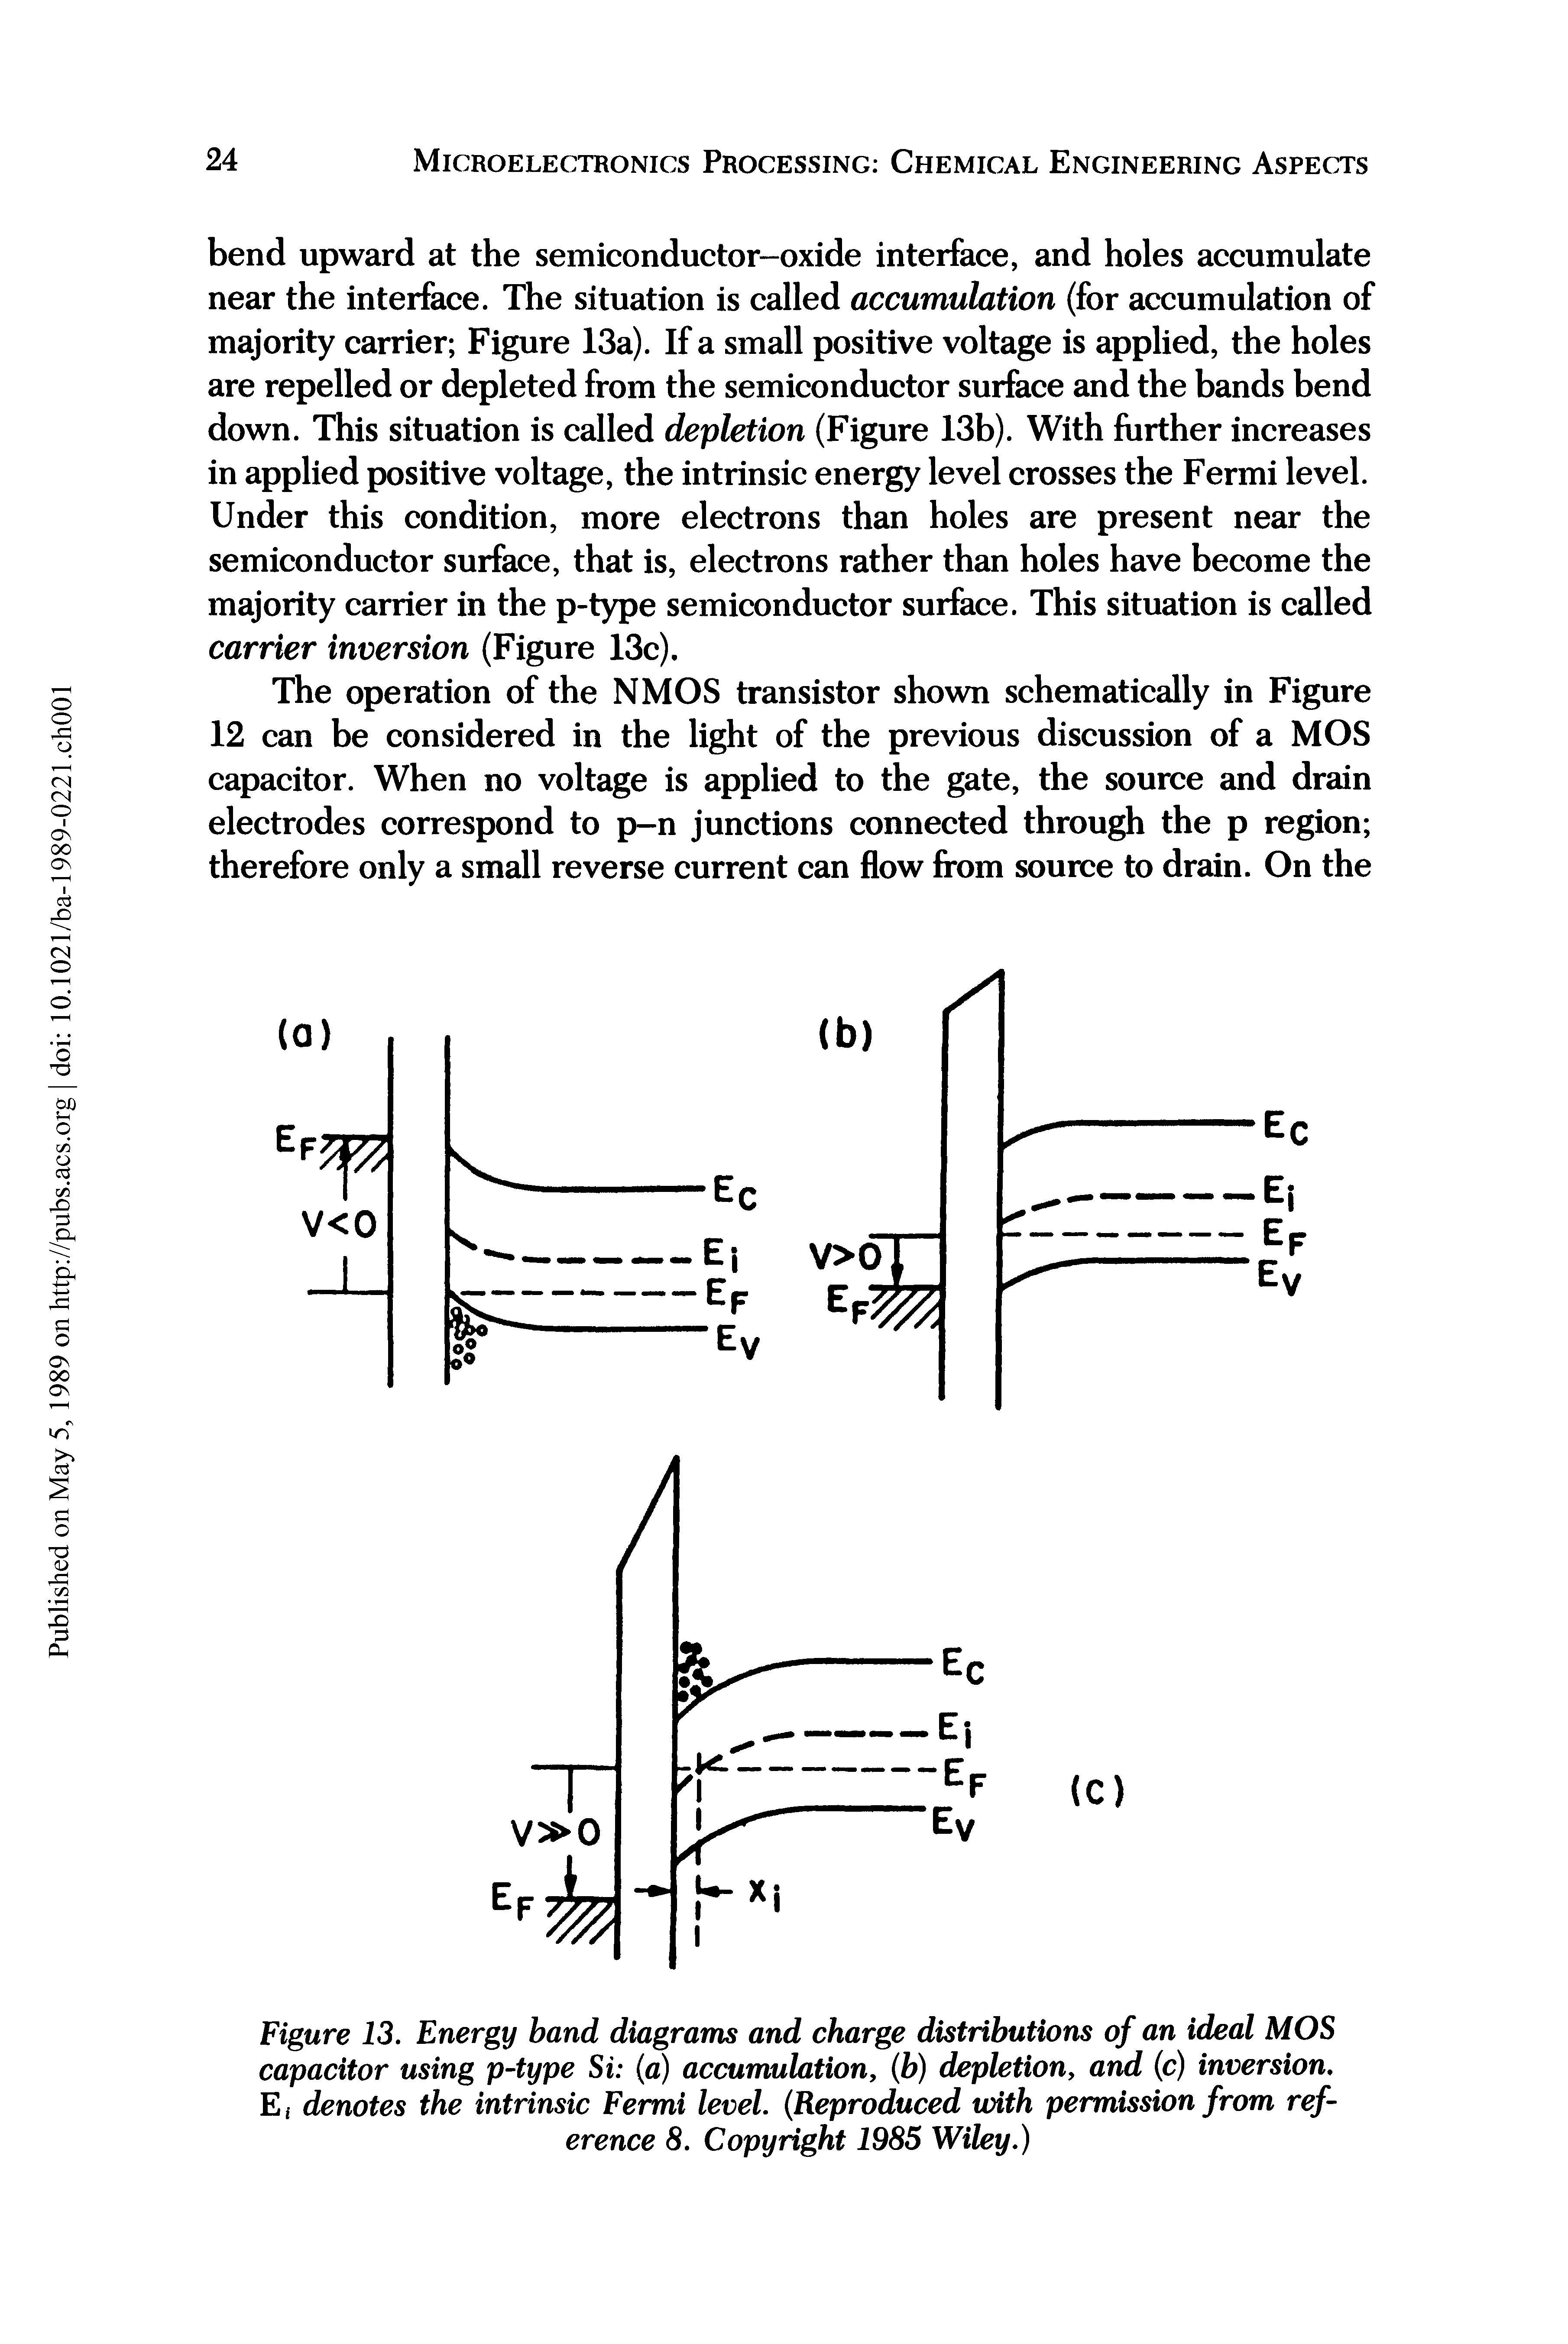 Figure 13. Energy band diagrams and charge distributions of an ideal MOS capacitor using p-type Si (a) accumulation, (b) depletion, and (c) inversion. Ef denotes the intrinsic Fermi level. (Reproduced mth permission from reference 8. Copyright 1985 Wiley.)...